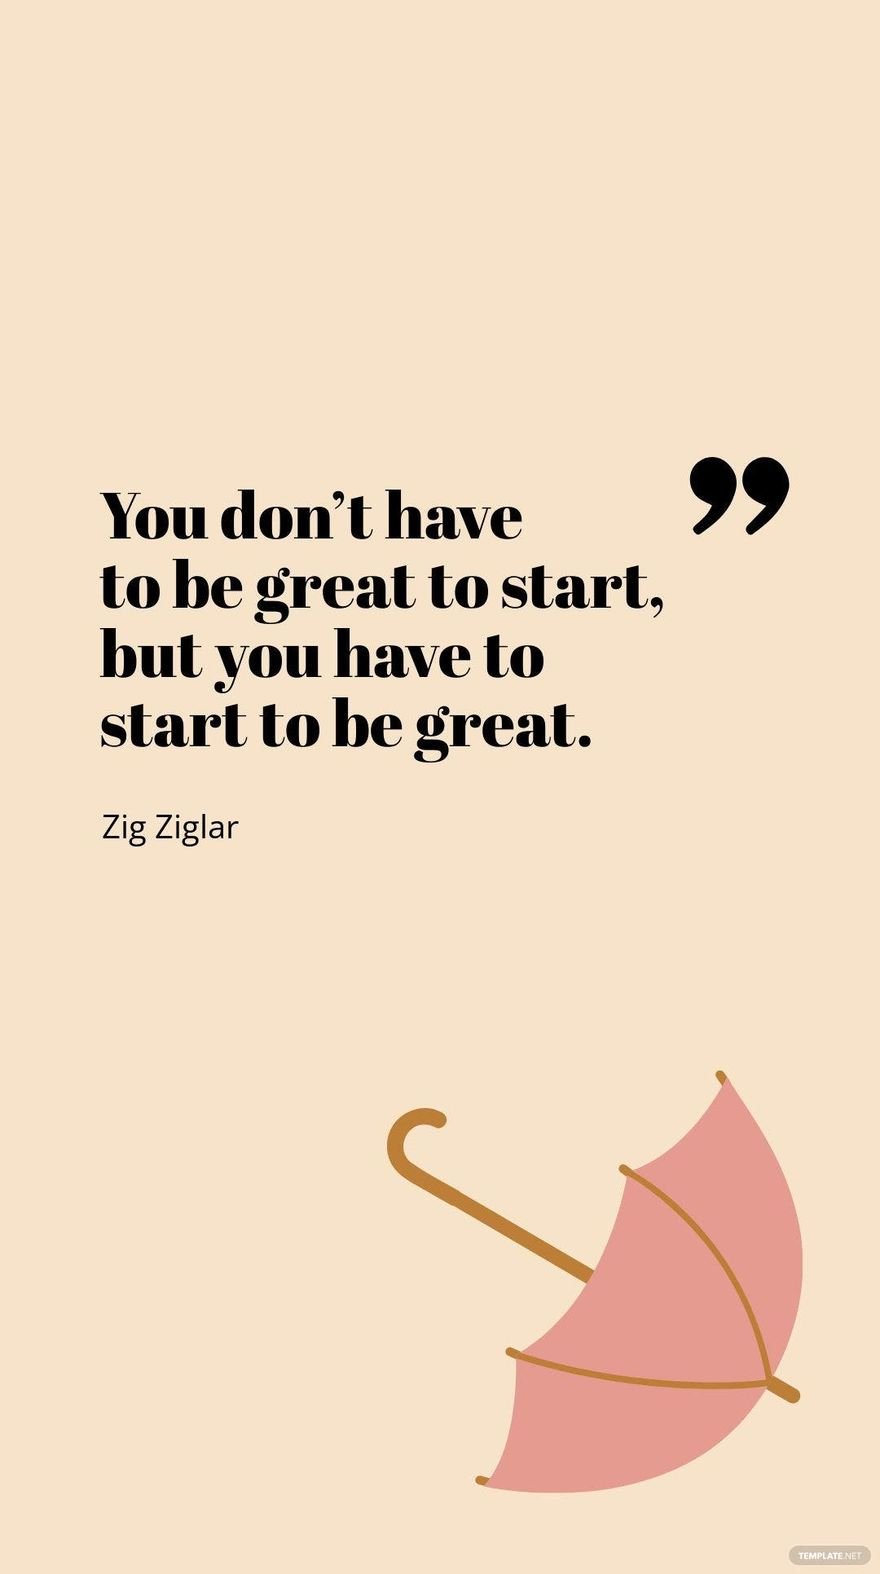 Zig Ziglar - You don’t have to be great to start, but you have to start to be great.